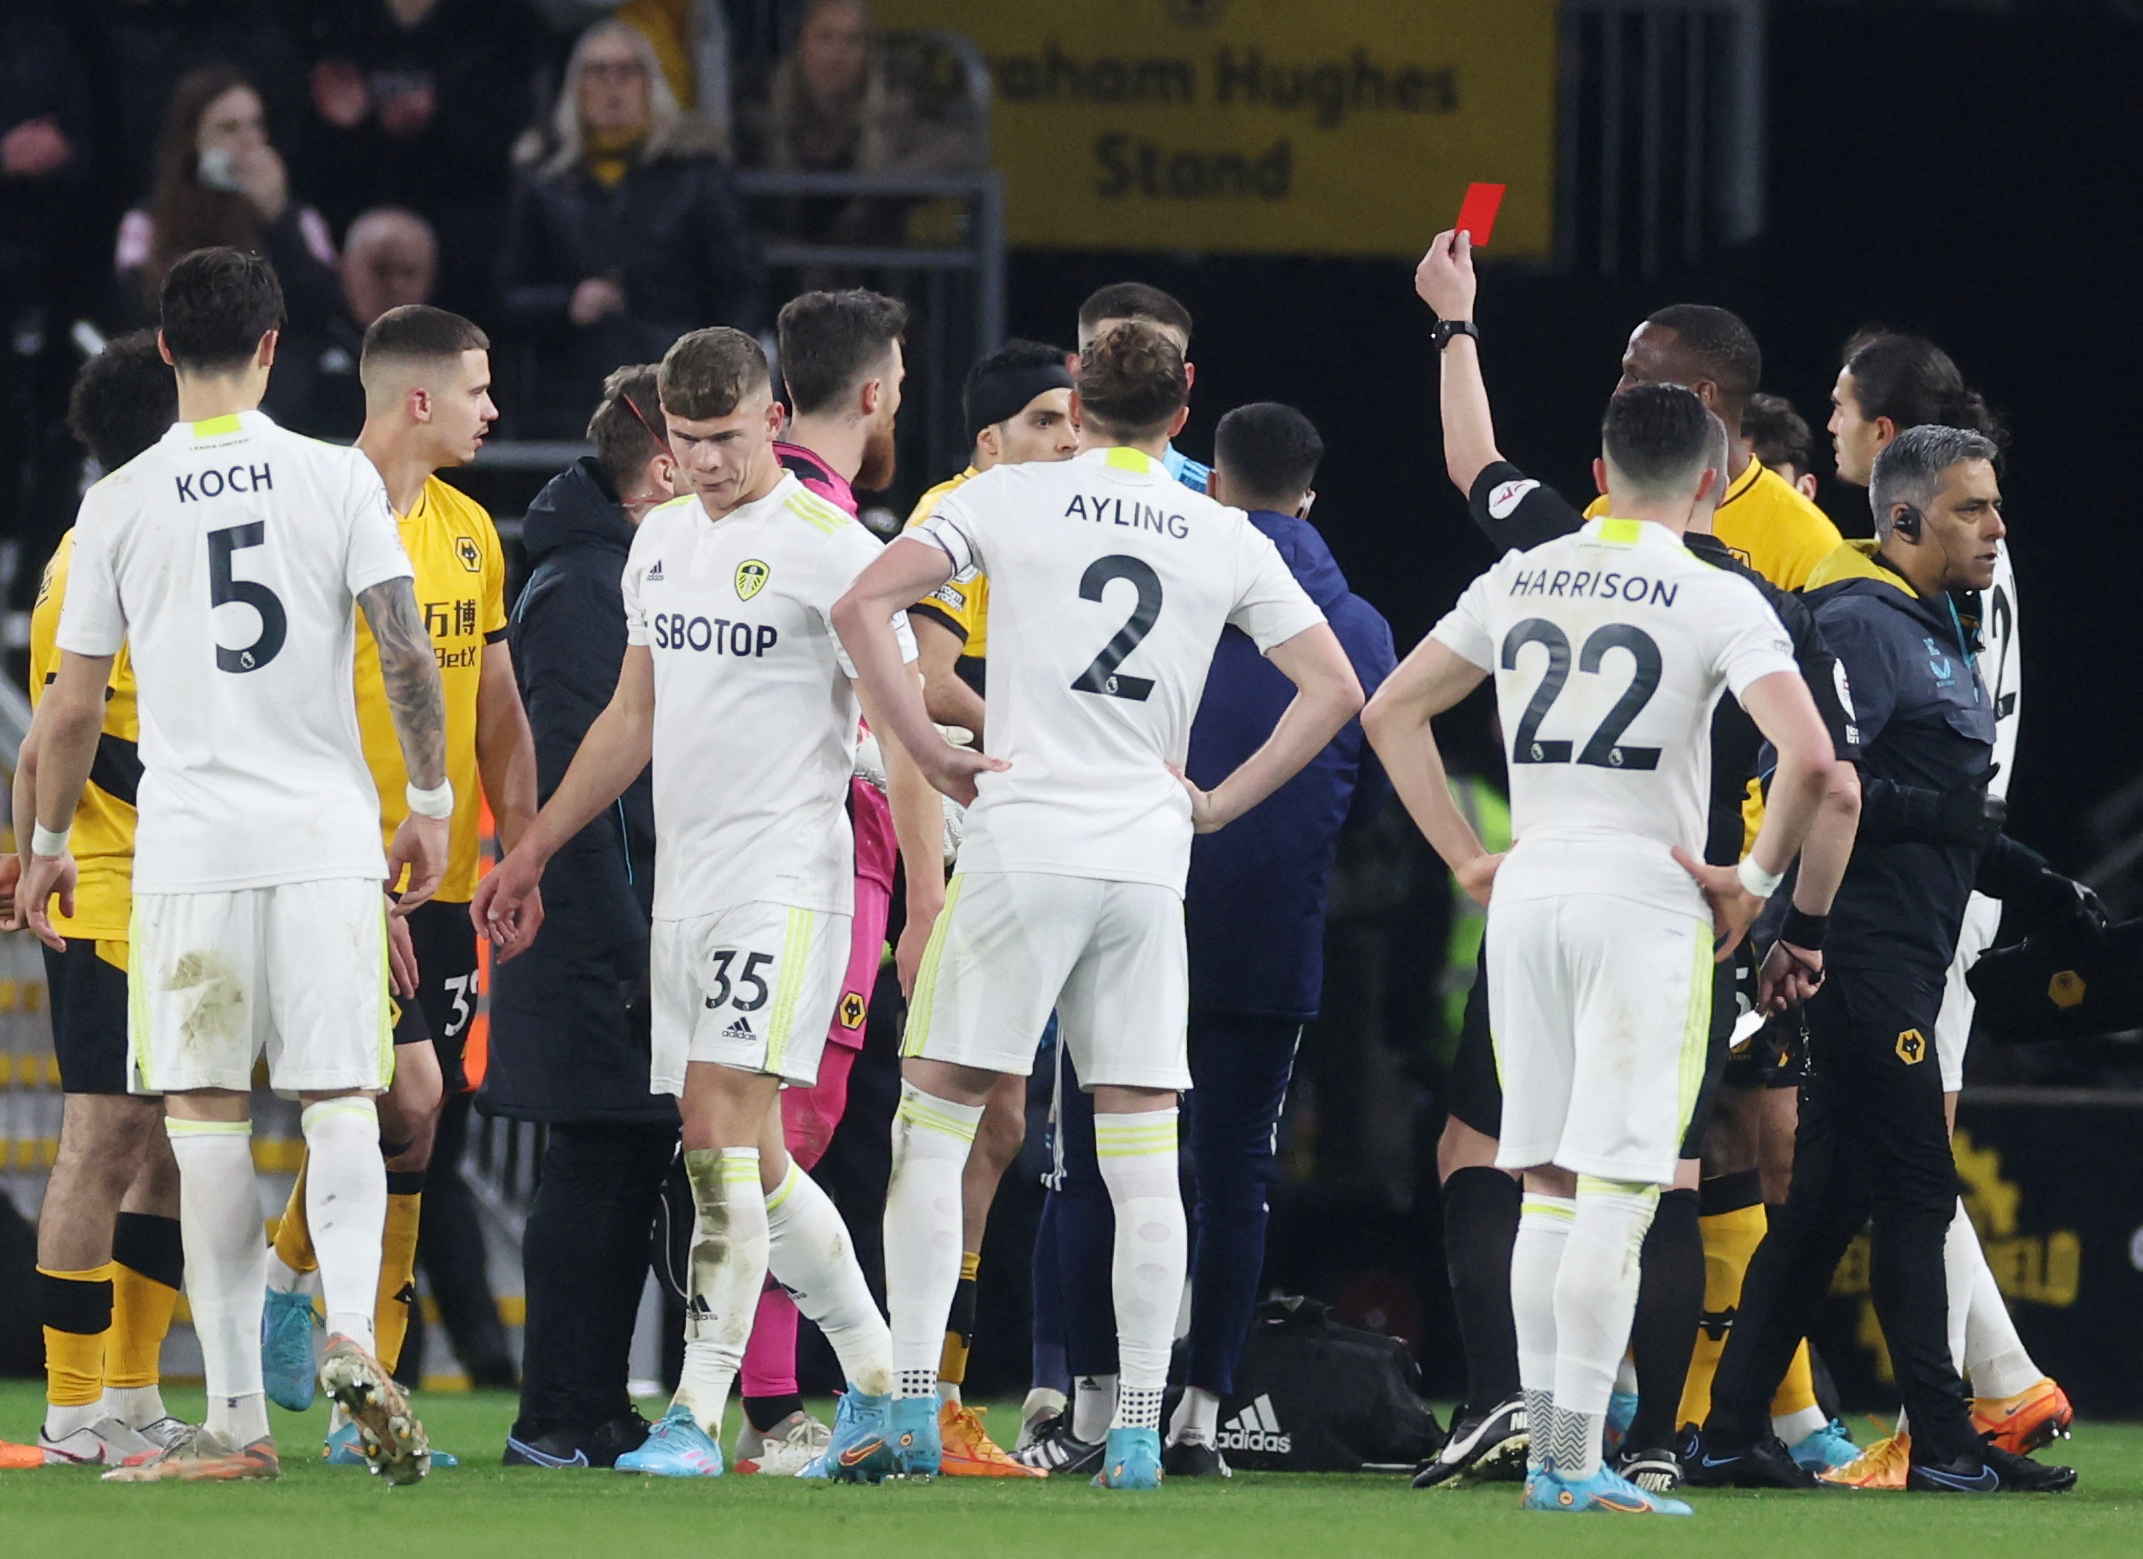 They expelled Raul Jimenez with the Wolves after a clash with the goalkeeper